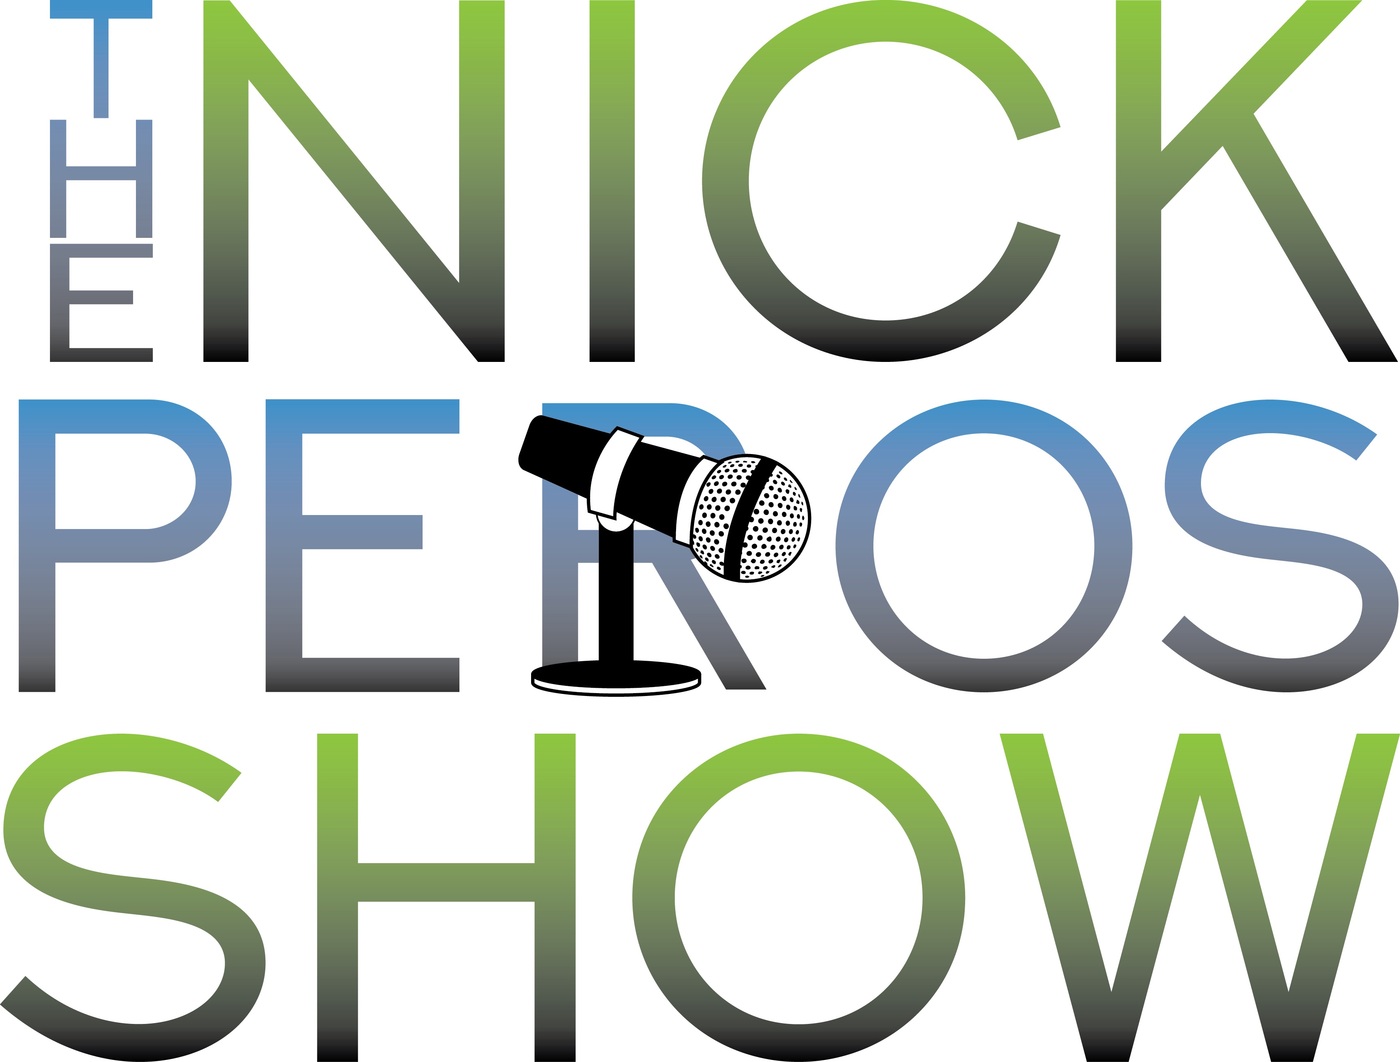  The Nick Peros Show - Episode 11 - All Rise!